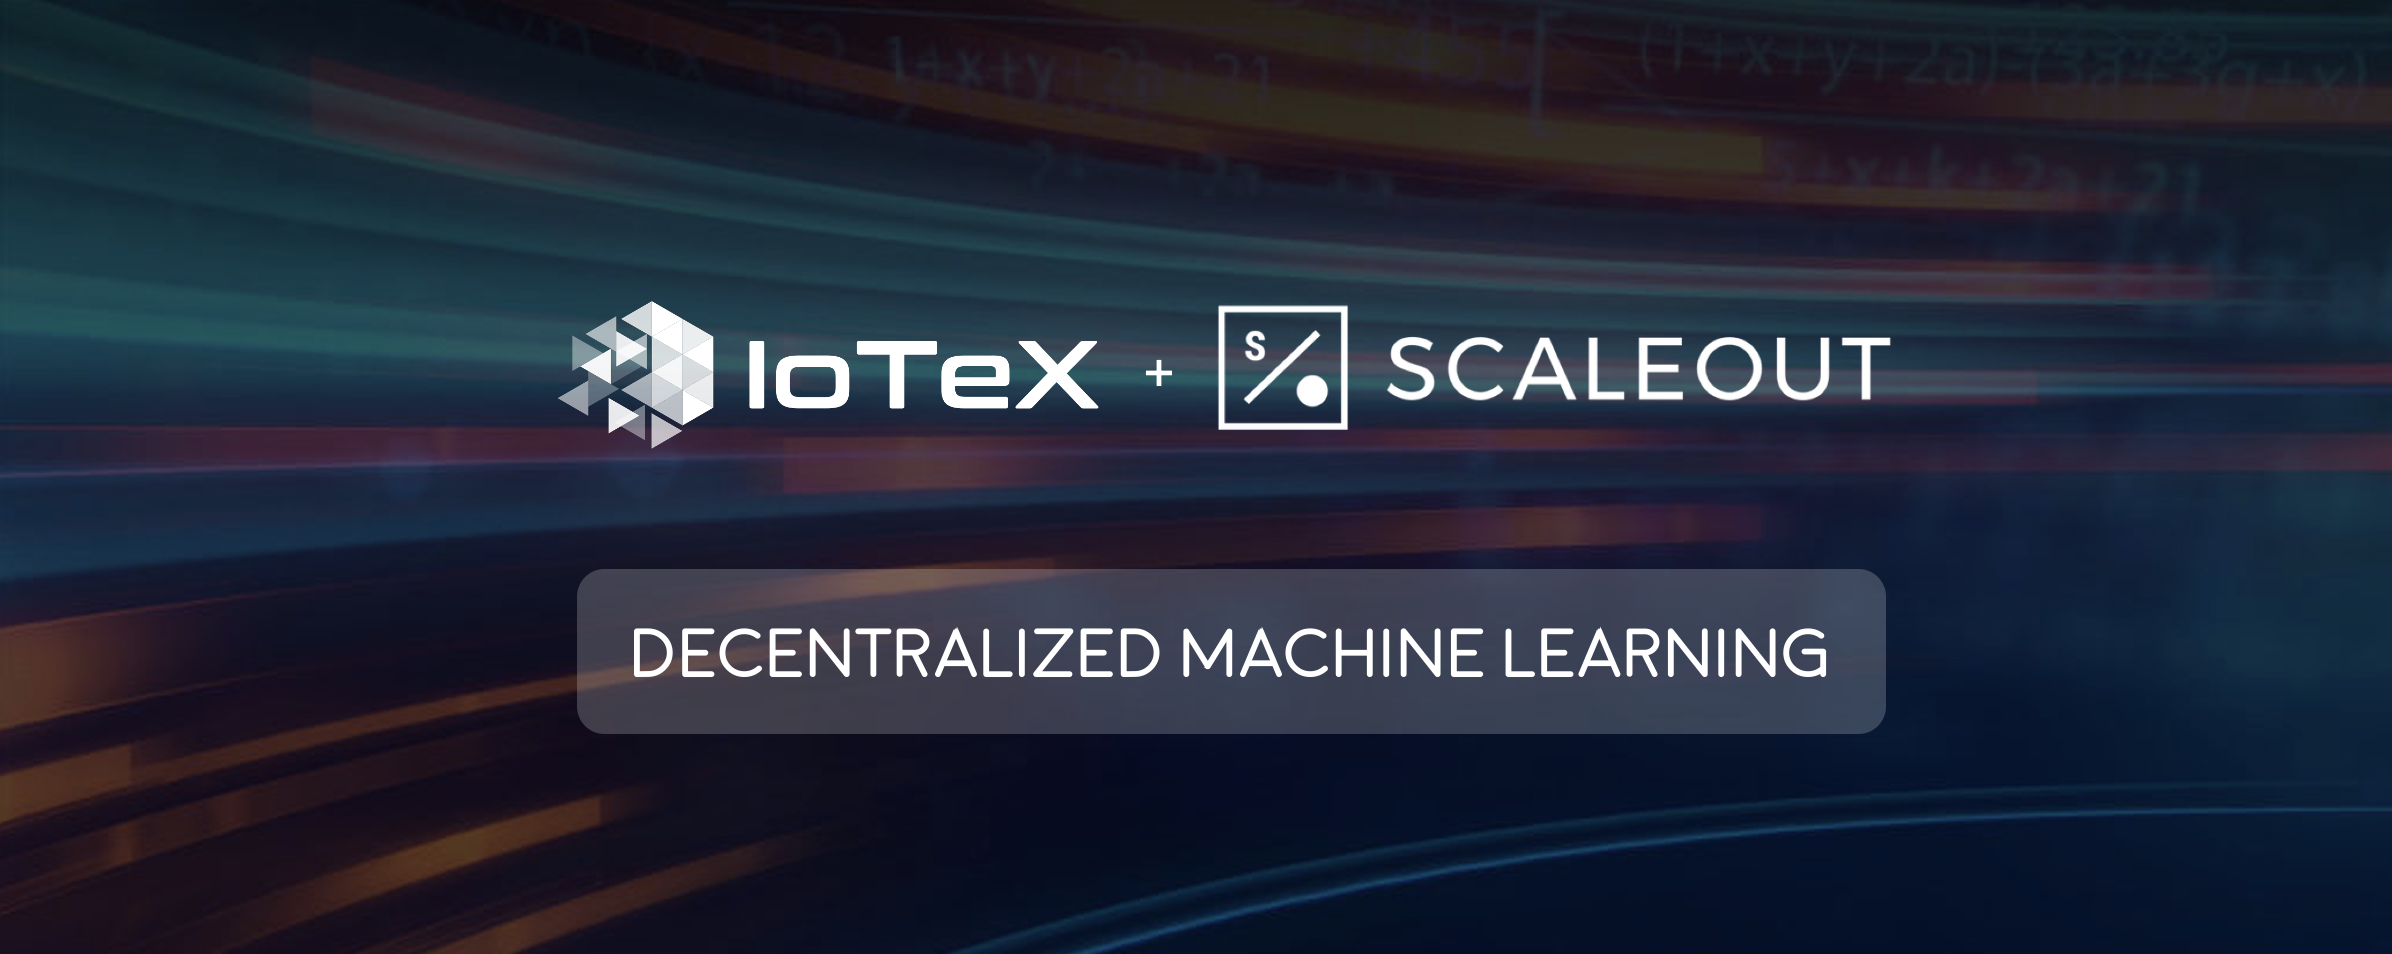 IoTeX & Scaleout Partner for Decentralized Machine Learning